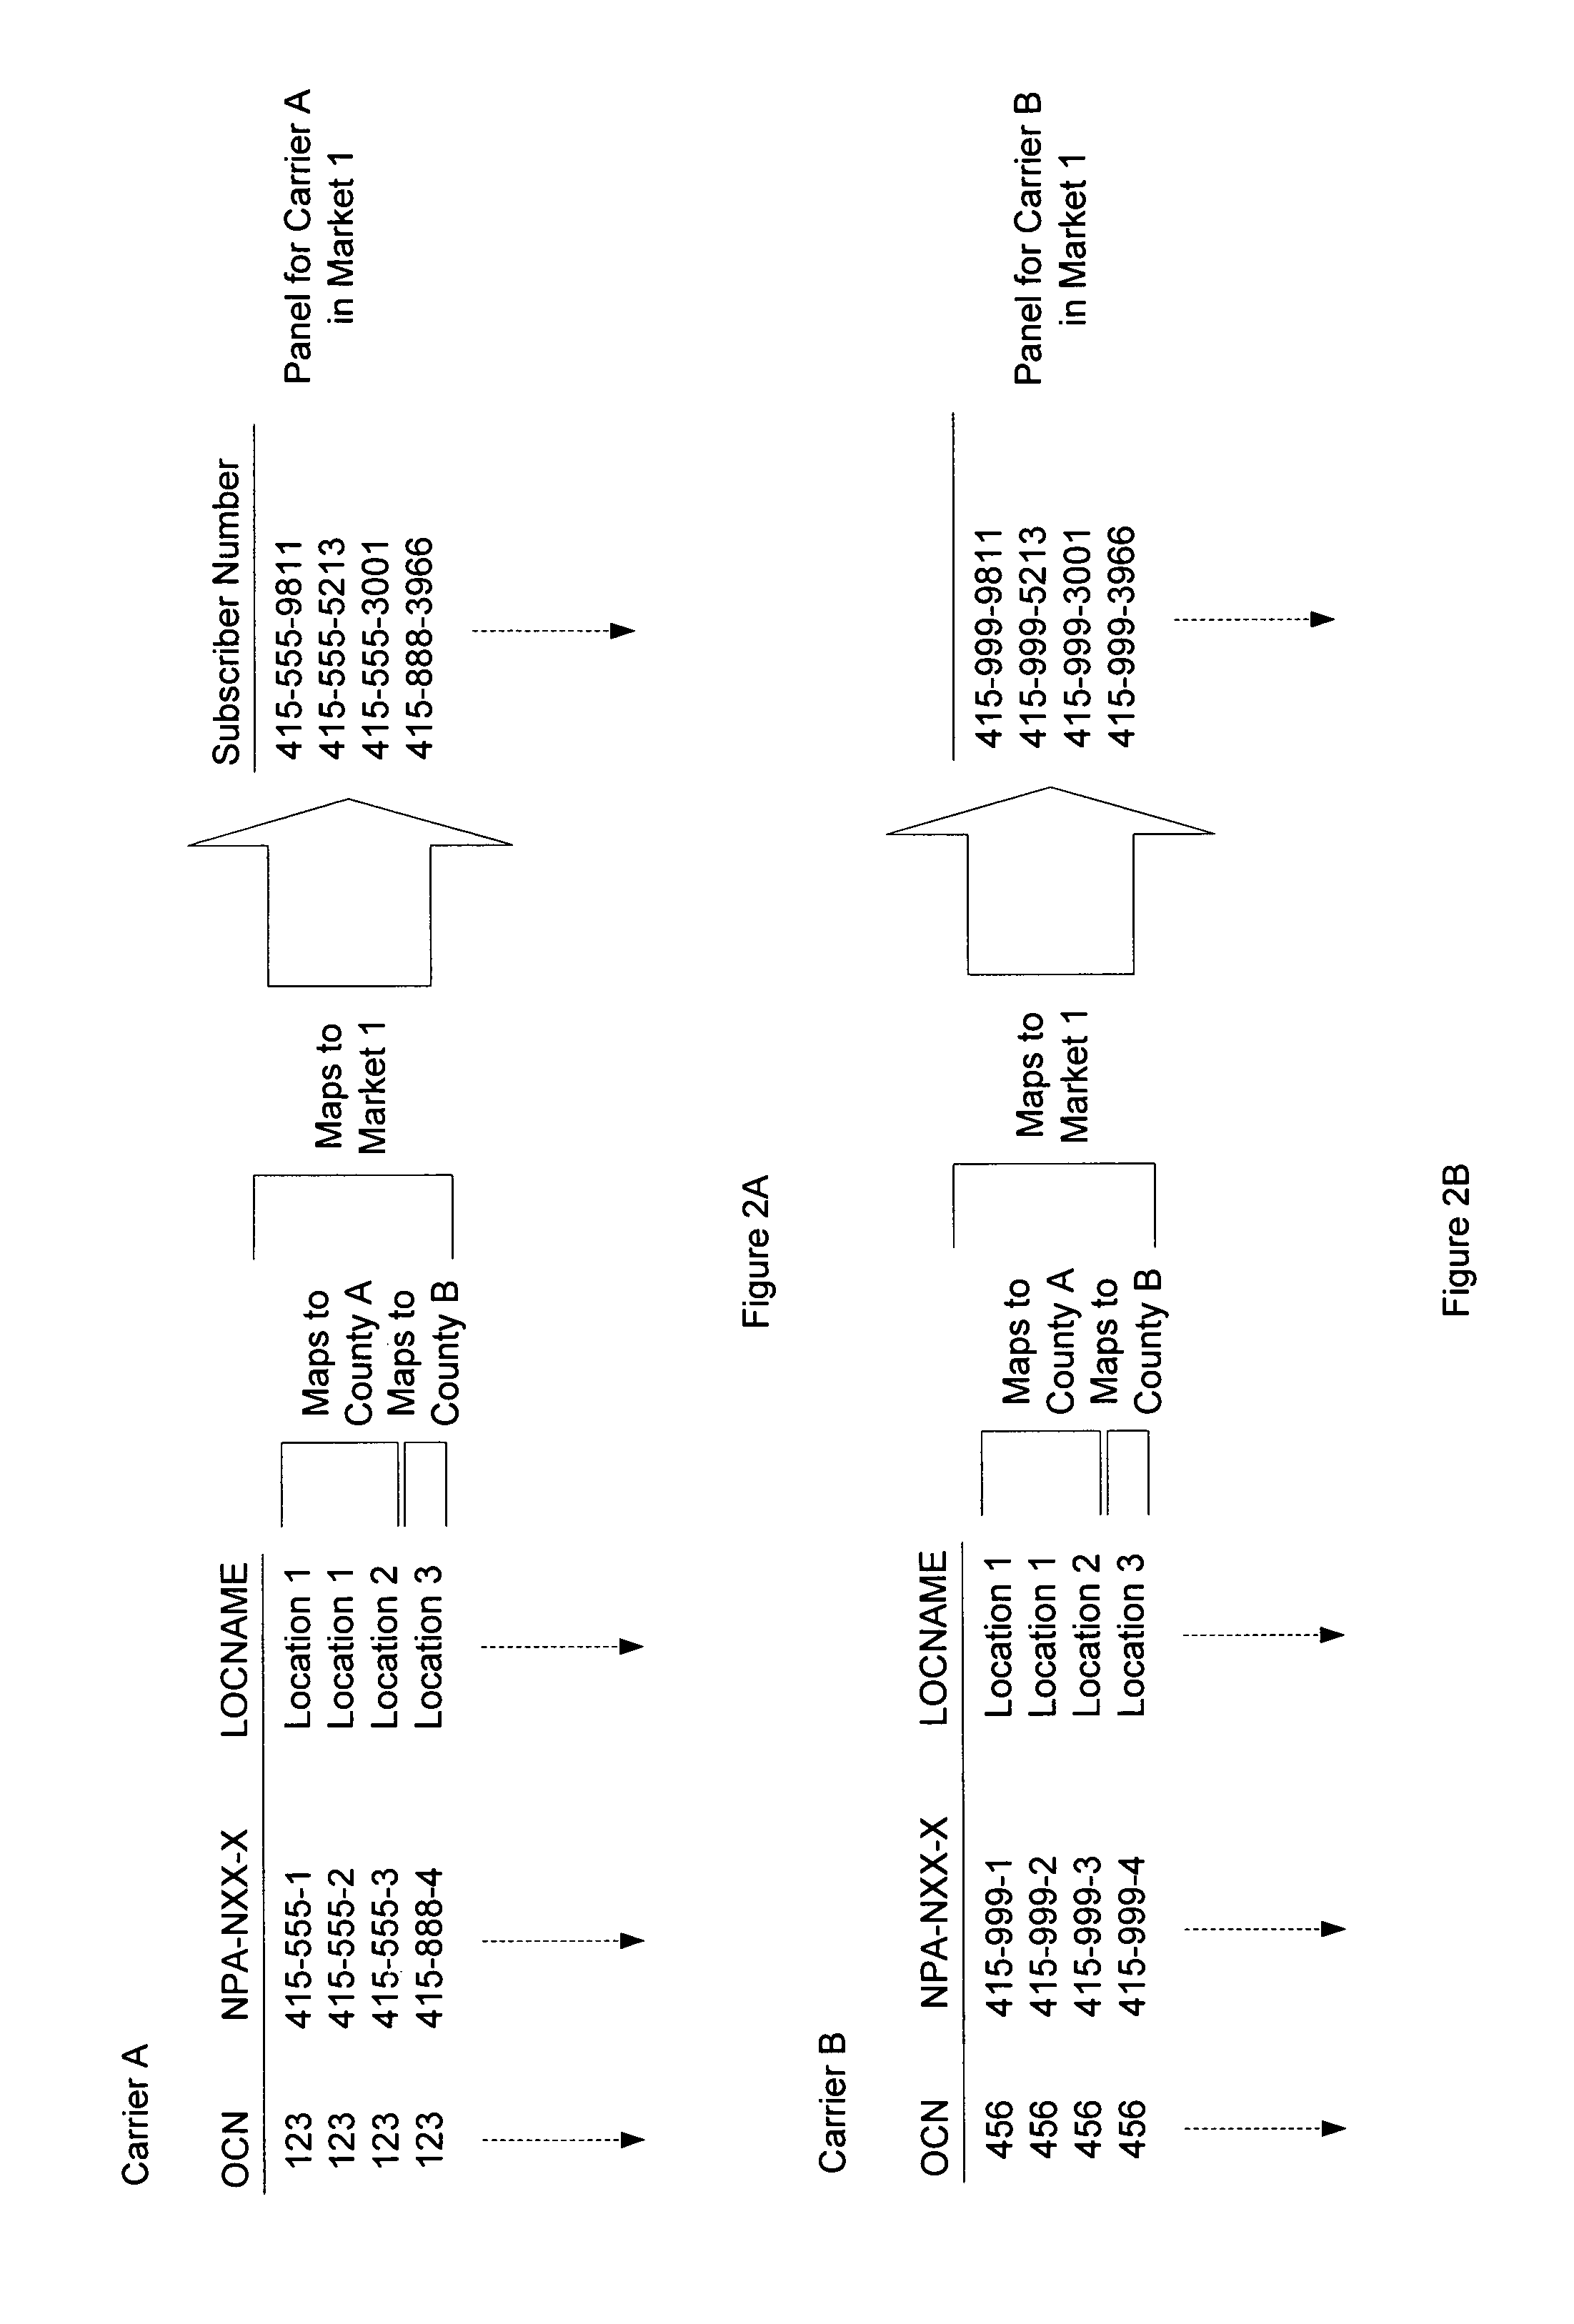 Method and system for measuring market information for wireless telecommunication devices